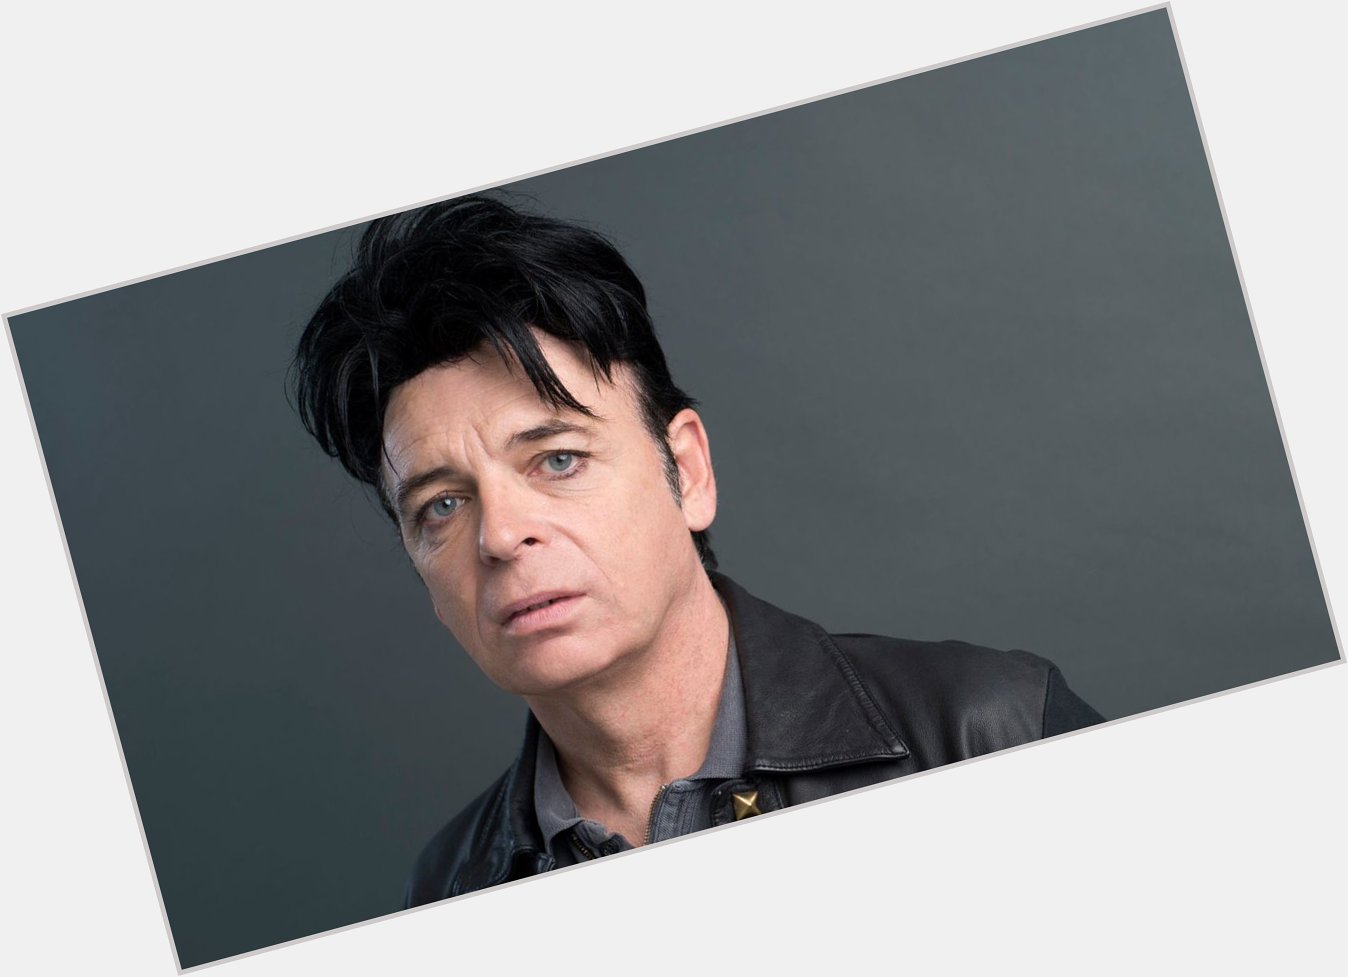 Please join me here at in wishing the one and only Gary Numan a very Happy 63rd Birthday today  